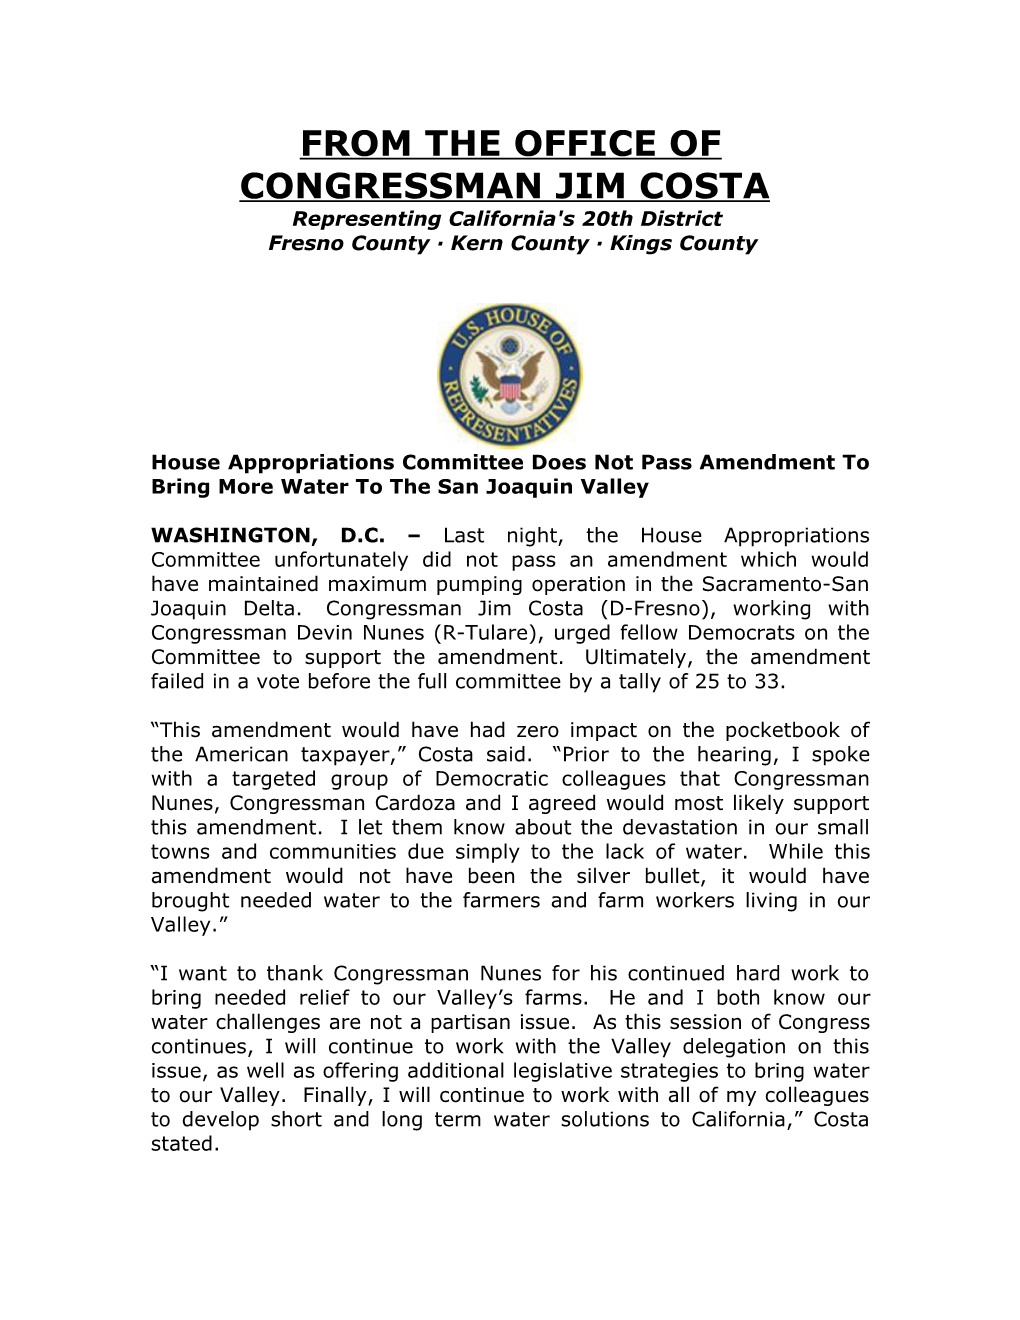 From the Office of Congressman Jim Costa